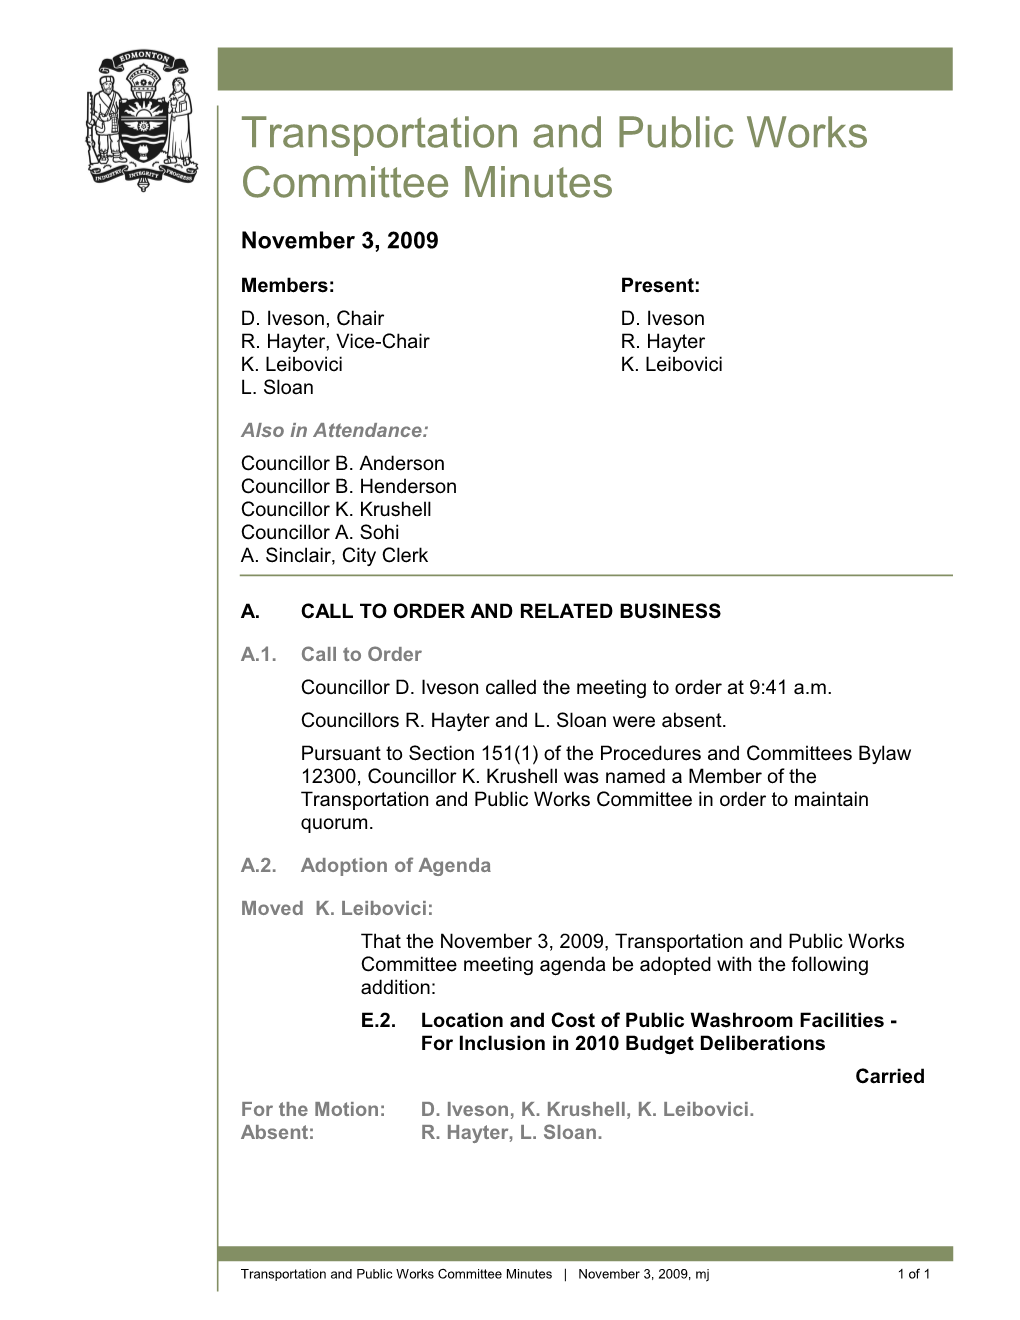 Minutes for Transportation and Public Works Committee November 3, 2009 Meeting